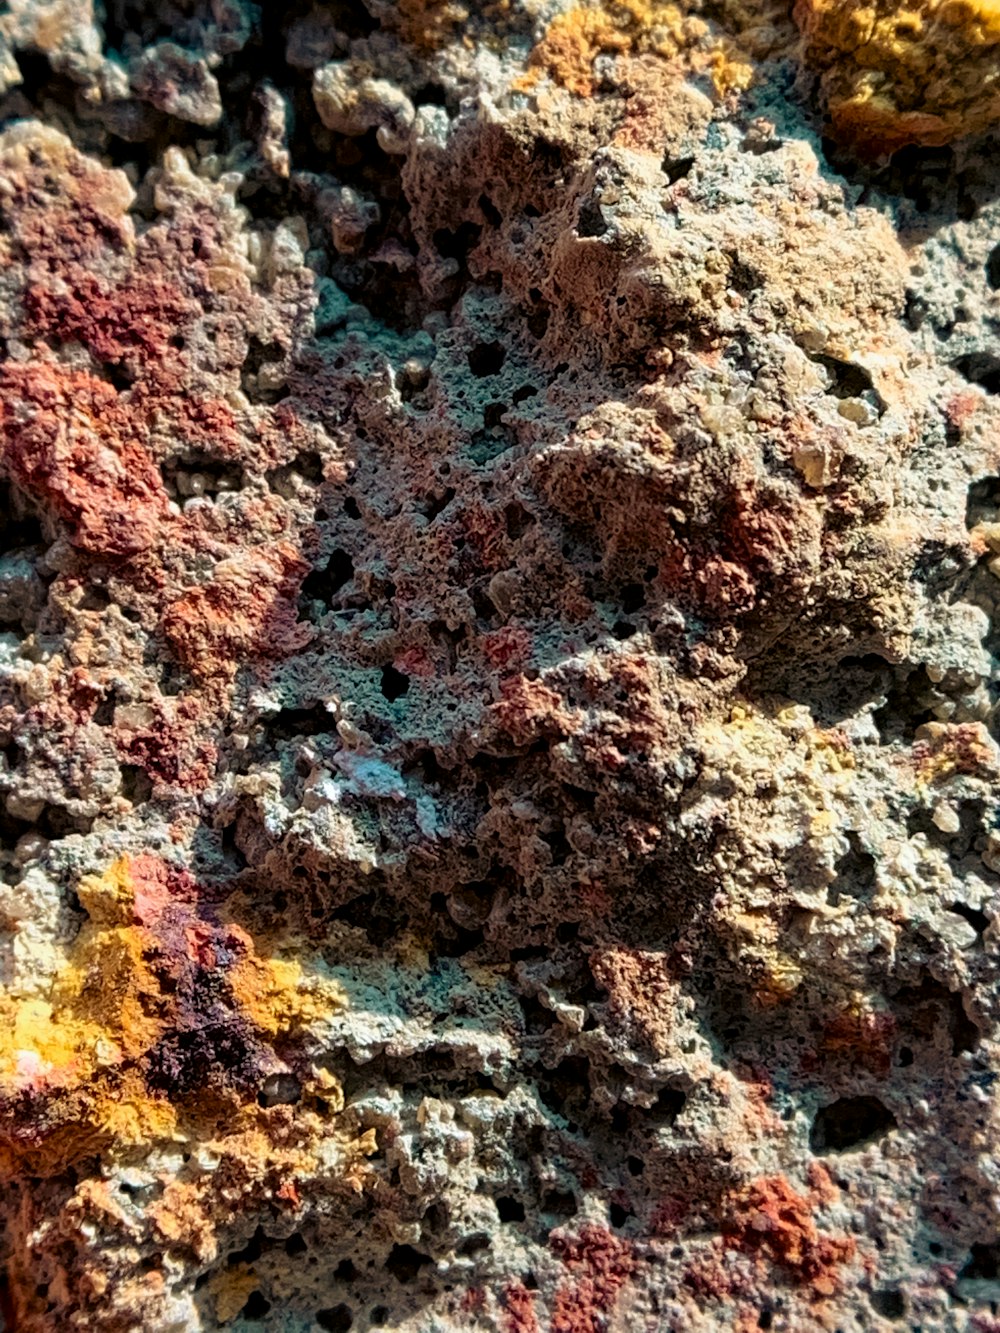 a close up of a rock with many different colored rocks